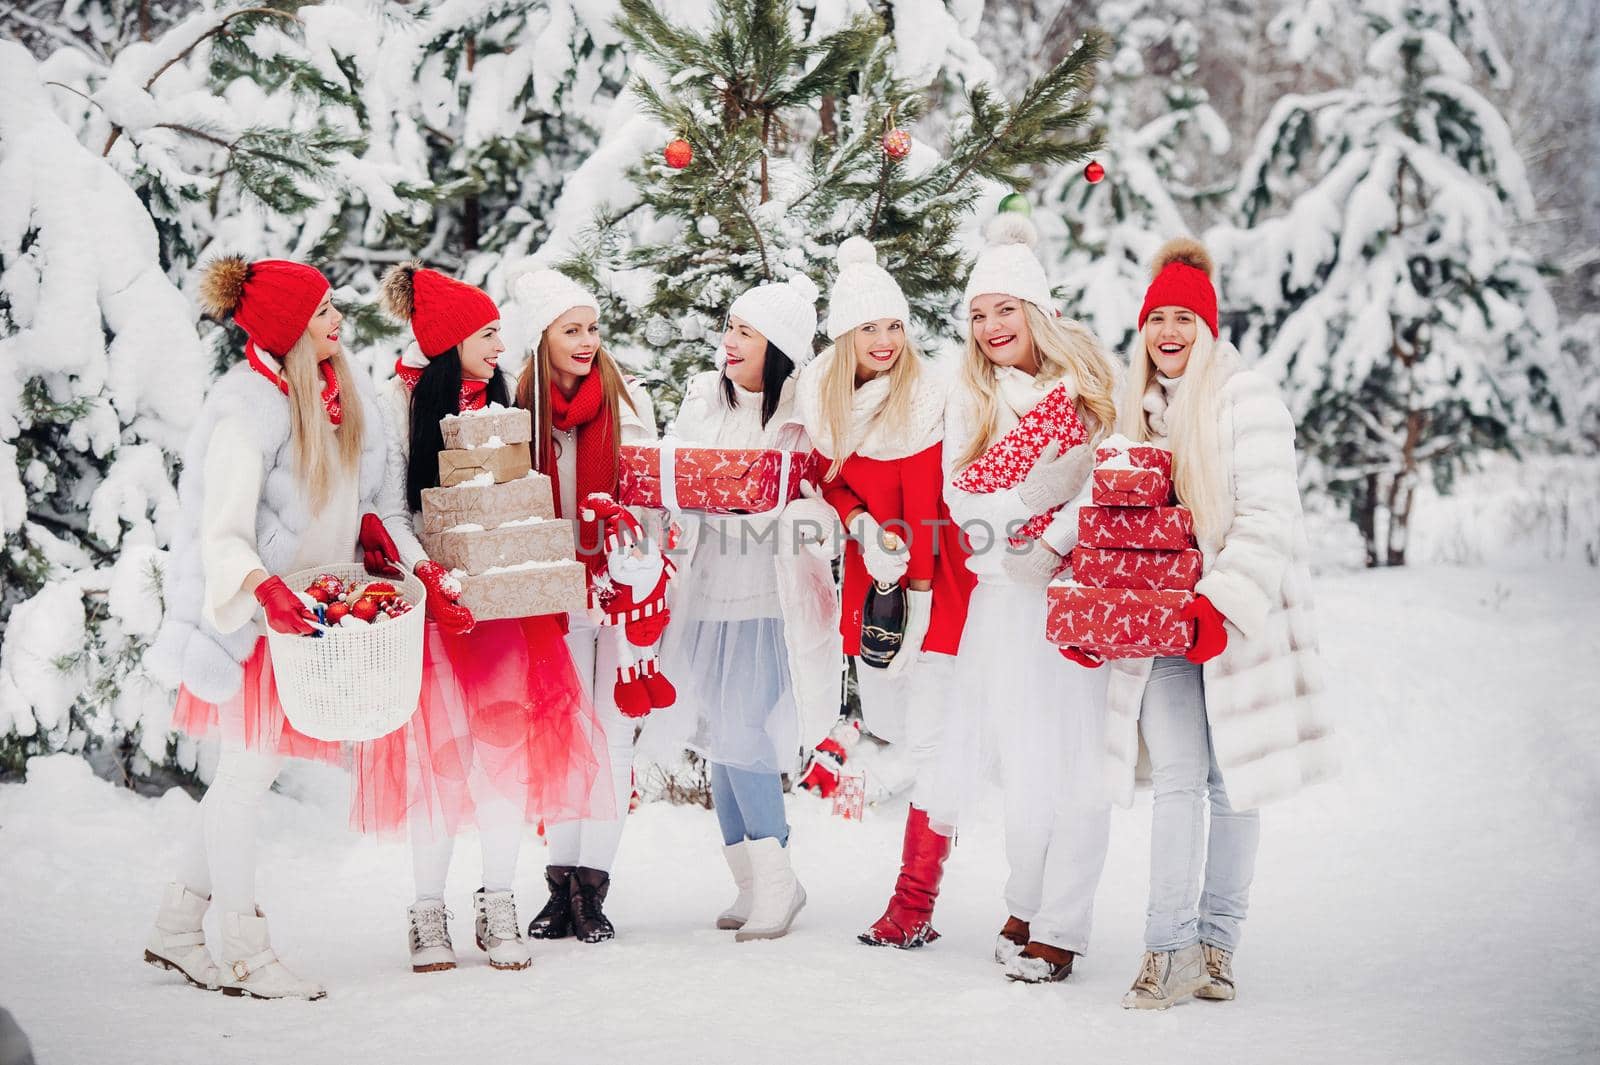 A large group of girls with Christmas gifts in their hands standing in the winter forest.Girls in red and white clothes with Christmas gifts in the snowy forest.